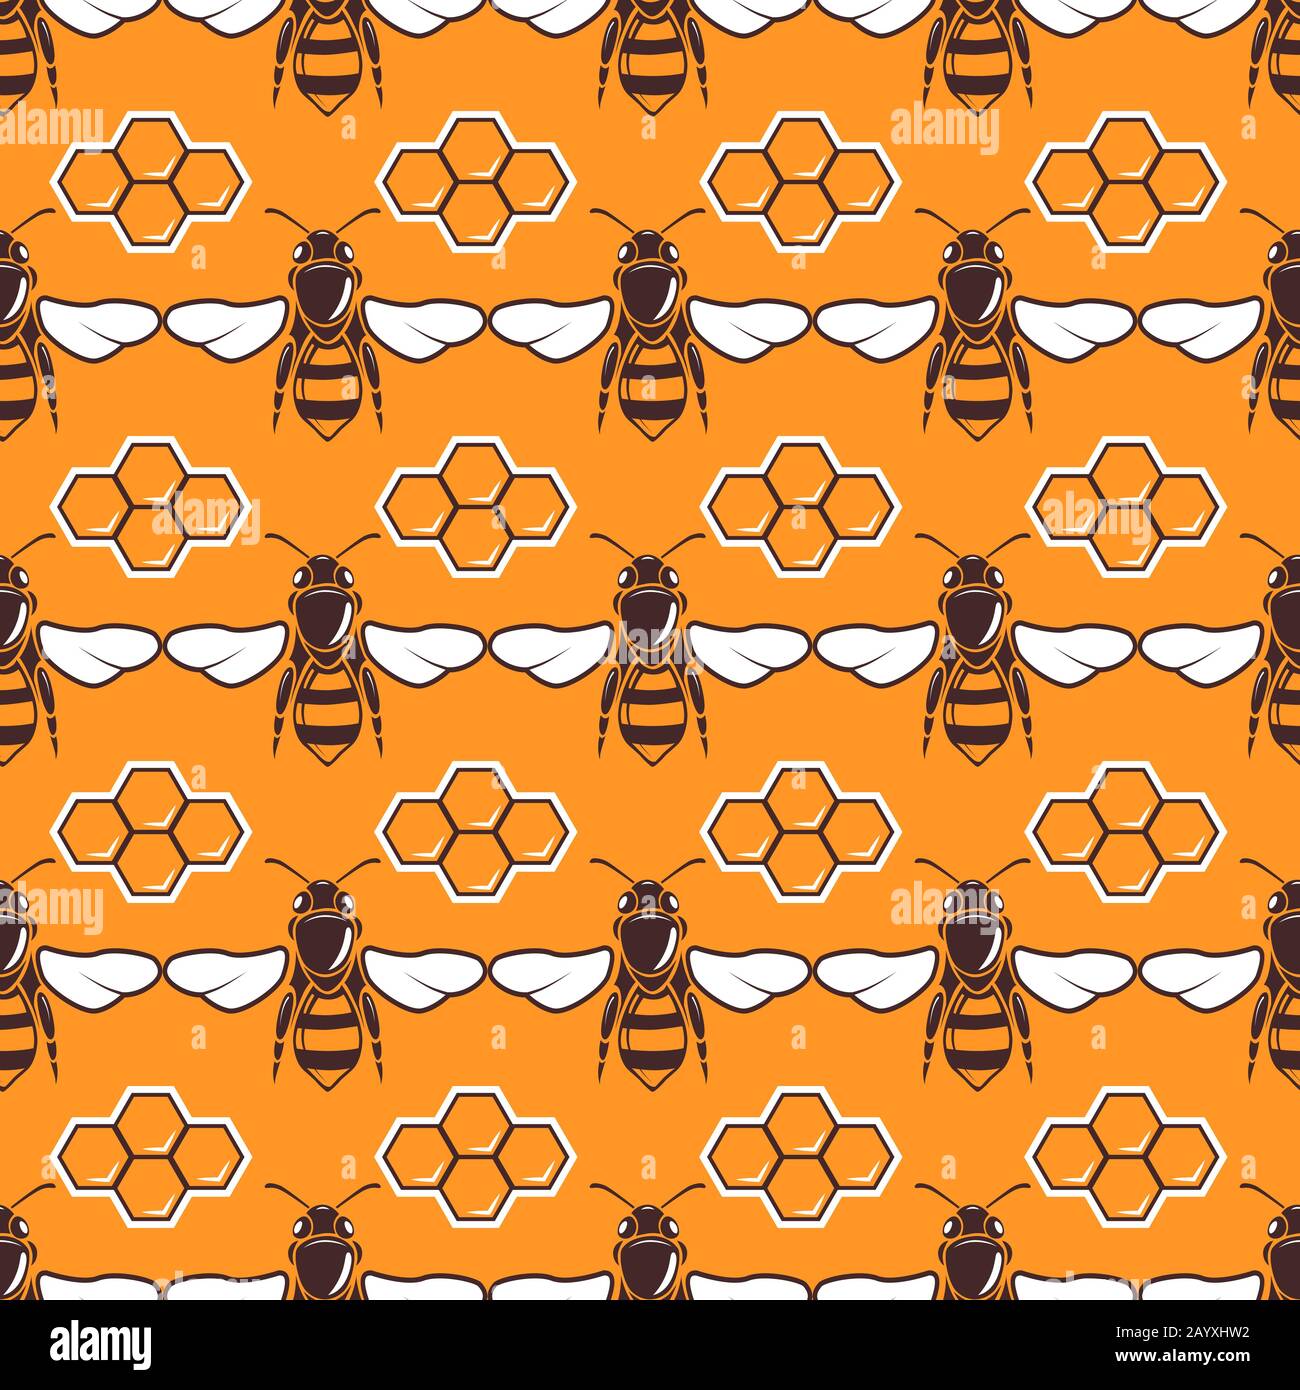 Bees, honey vector seamless pattern in brown and orange color, honeycomb illustration Stock Vector